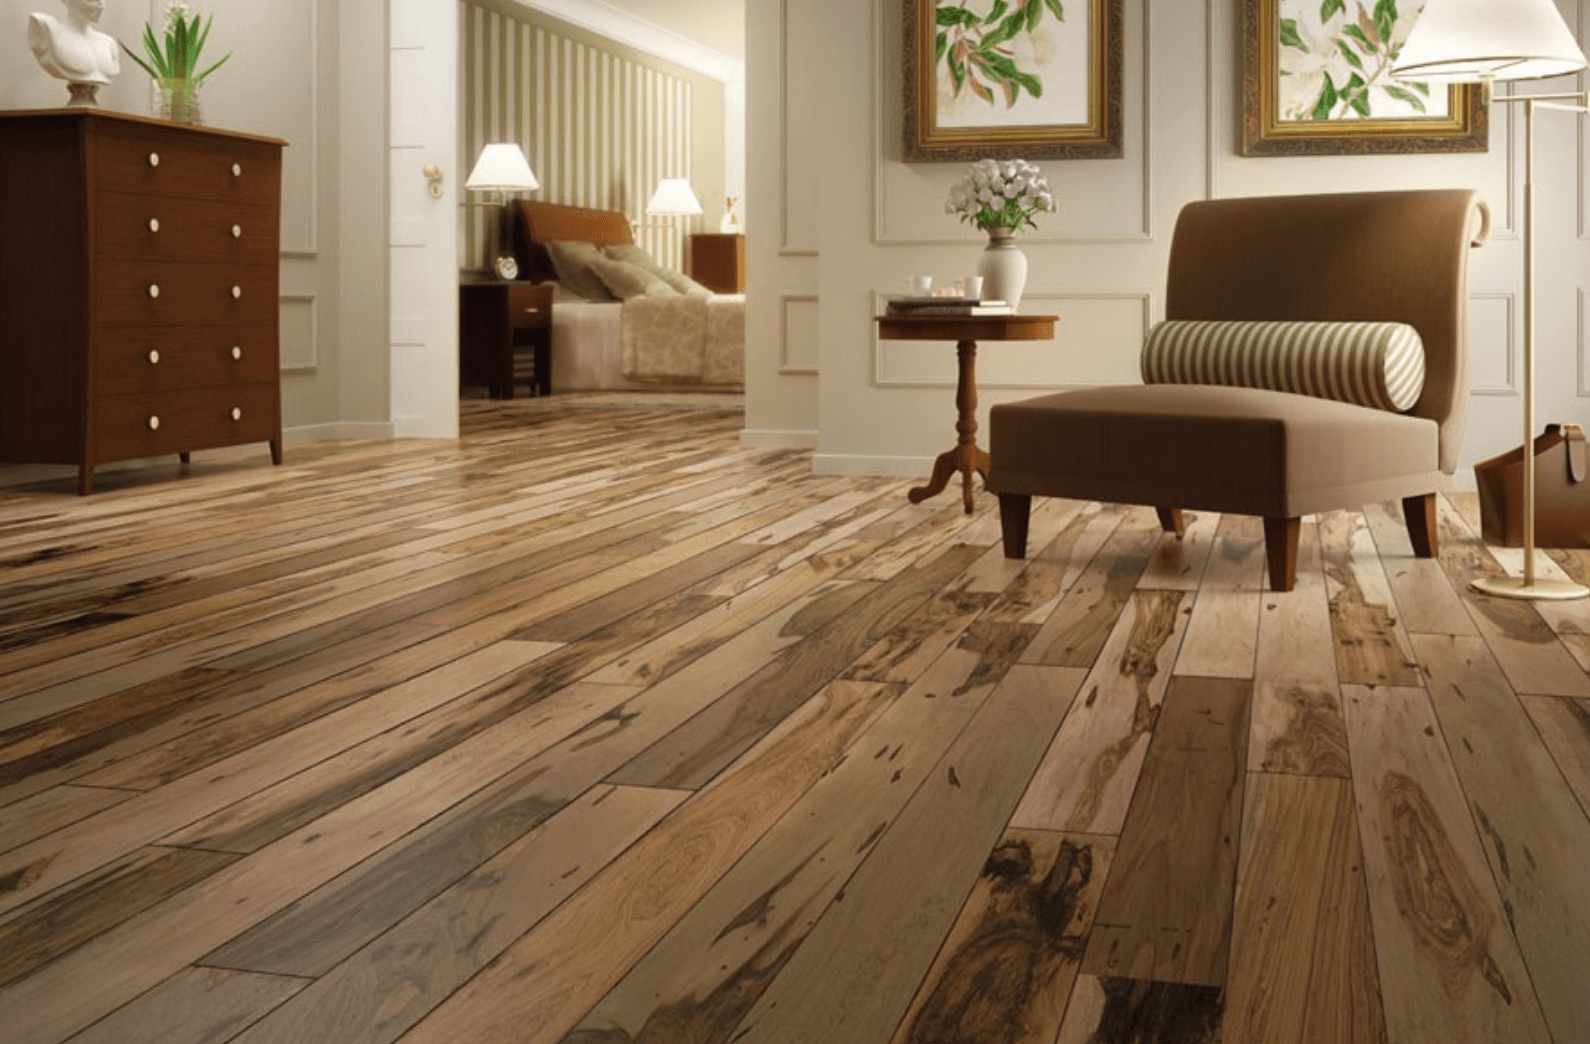 A large, luxurious living space with wooden laminated flooring